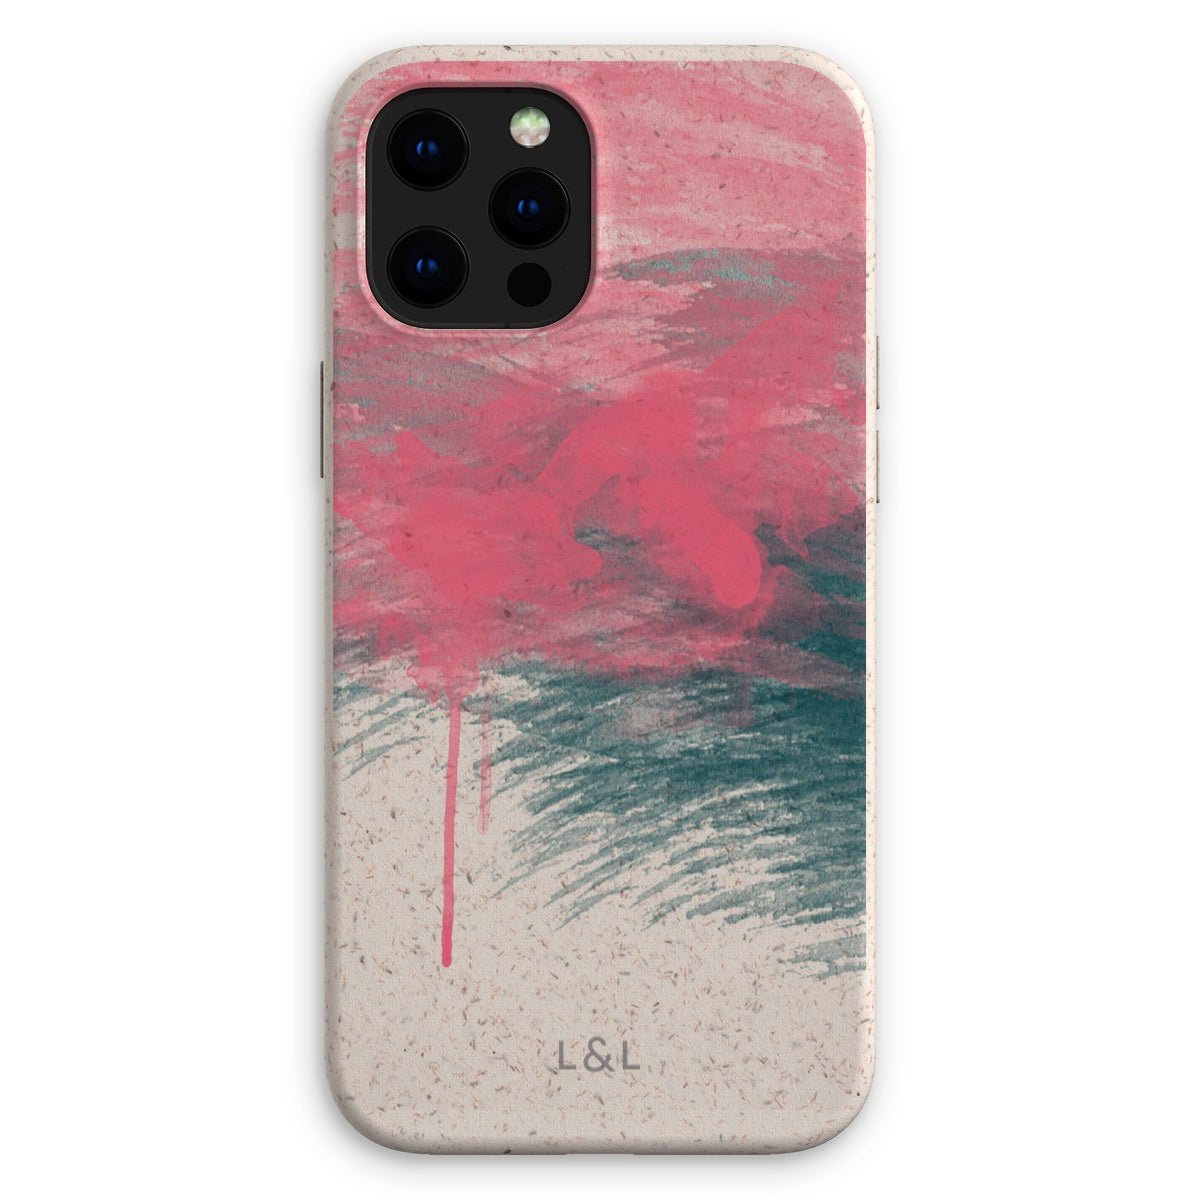 Abstract Aesthetic Eco Phone Case - Loam & Lore